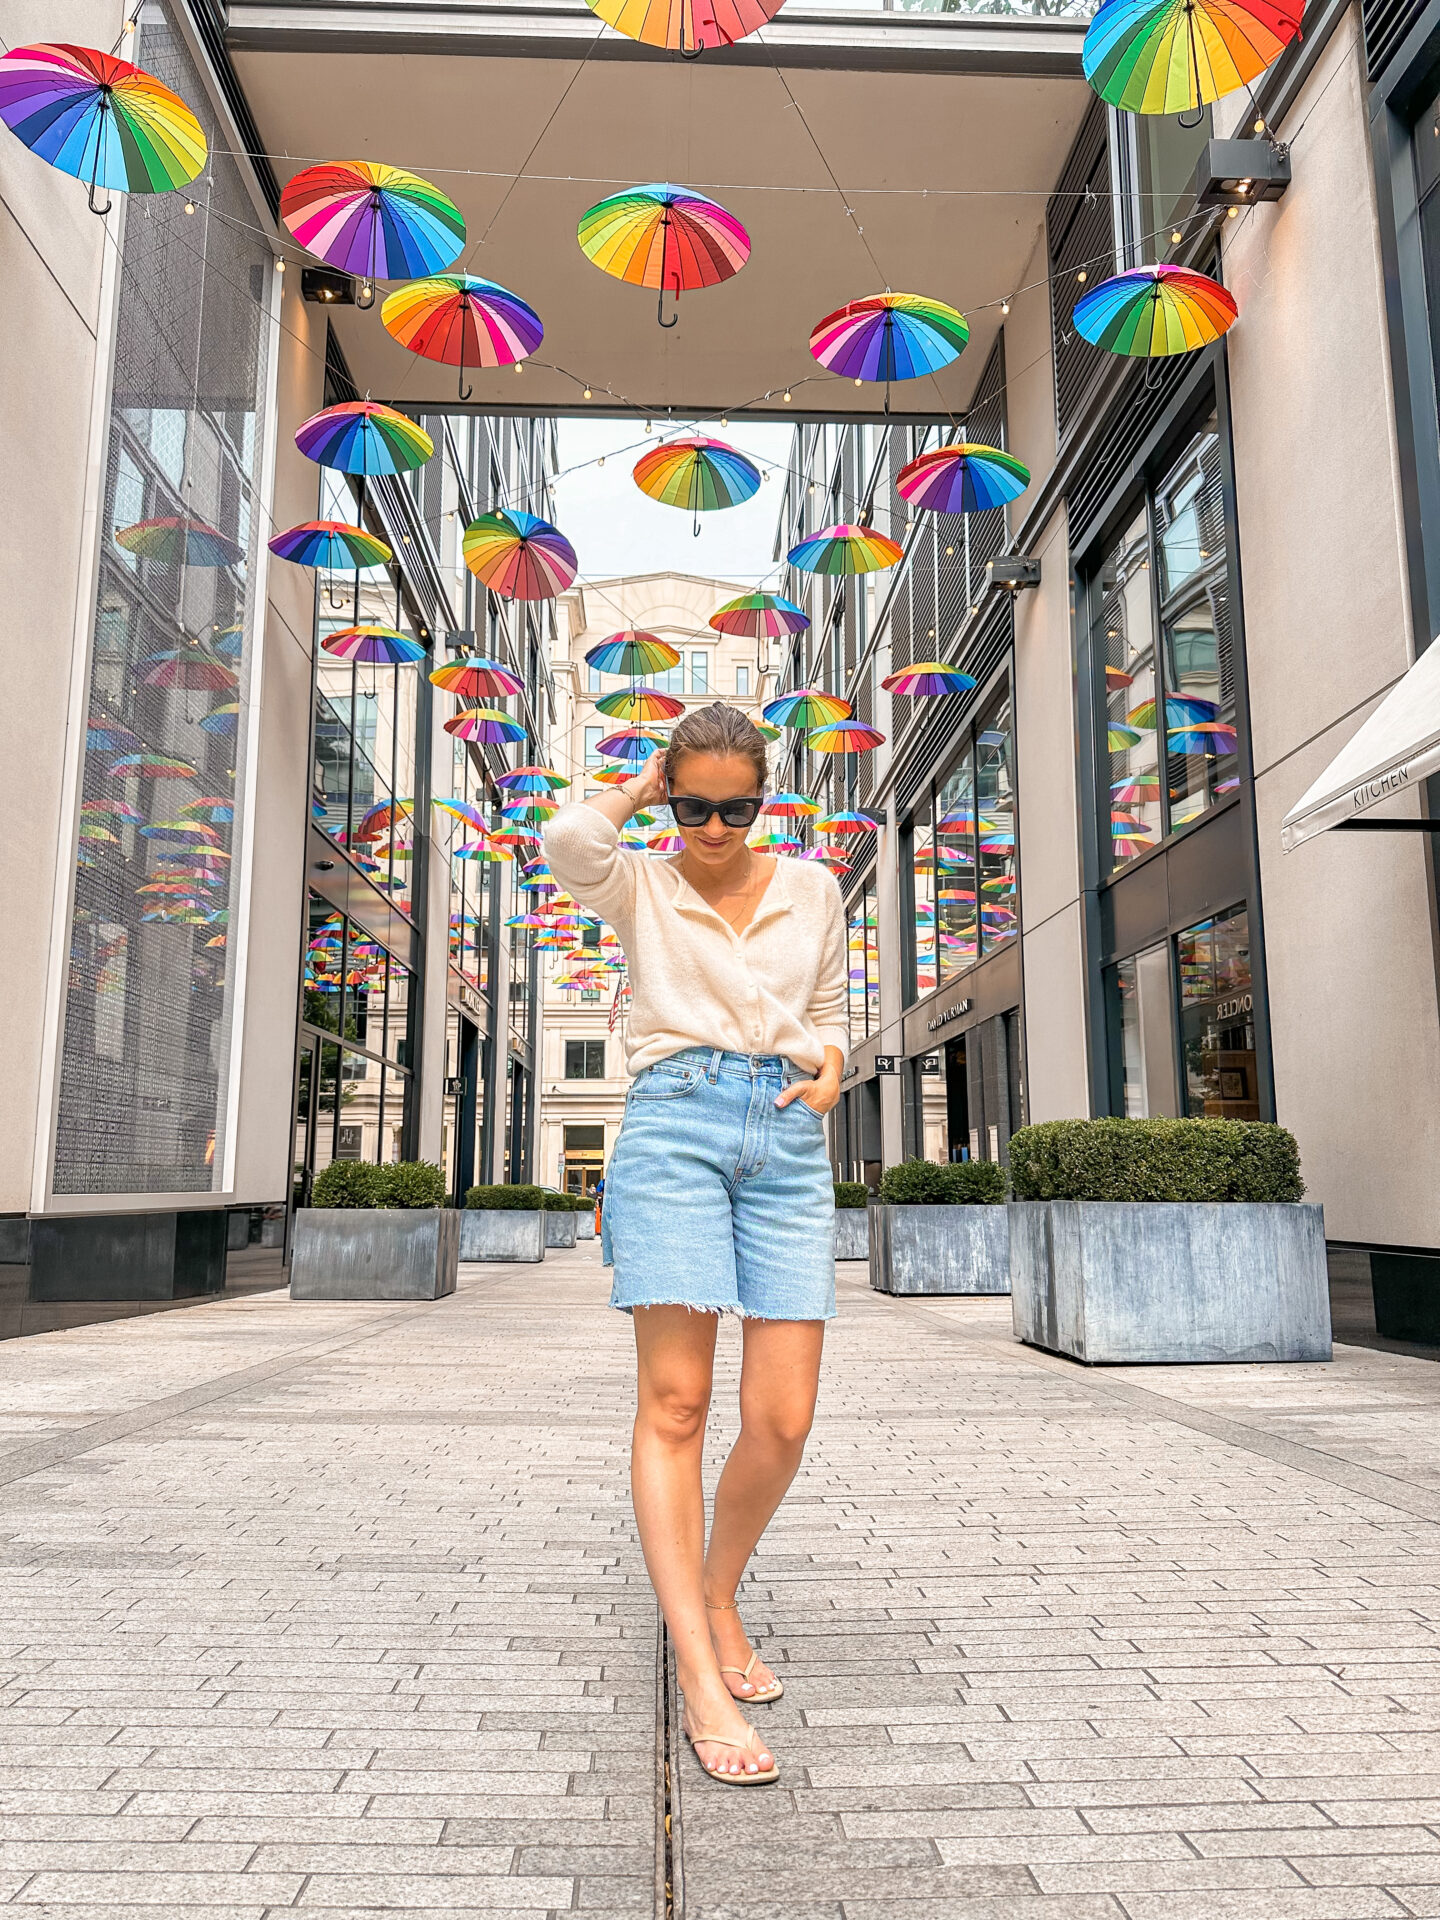 Palmer Alley umbrella alley in Washington DC City Center by
Lifestyle and travel blogger Angela Lanter